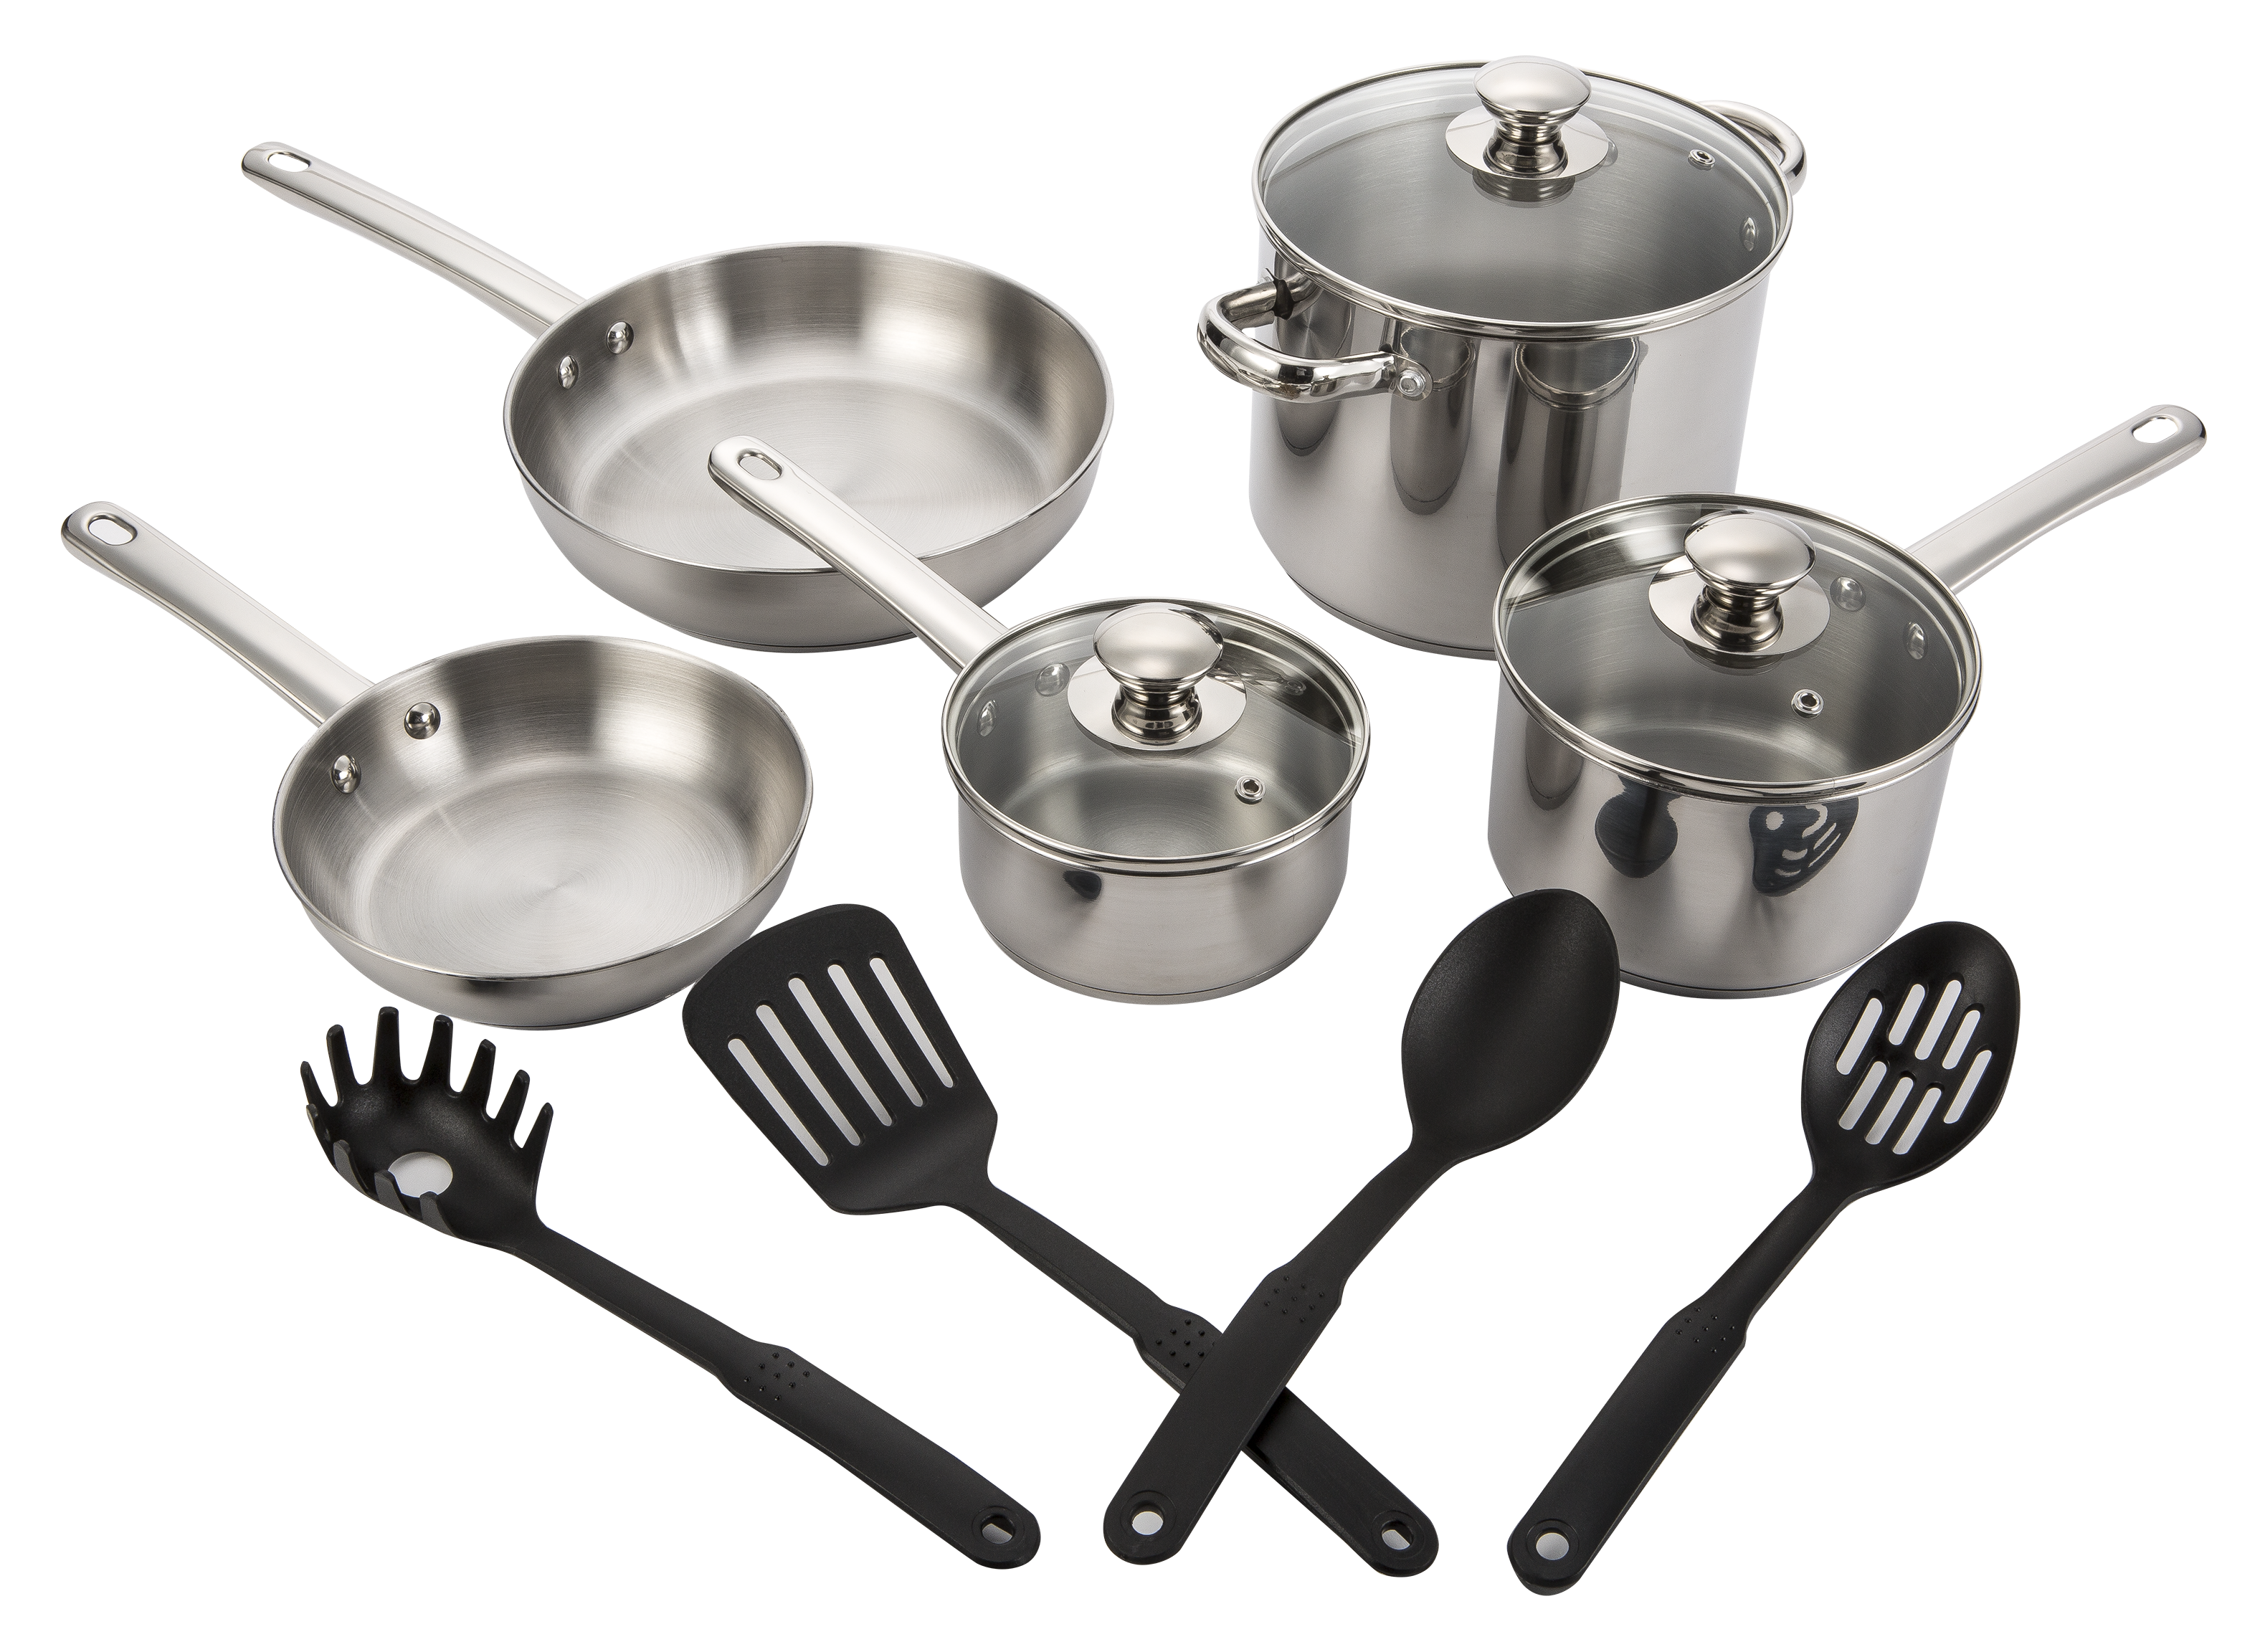 https://crdms.images.consumerreports.org/prod/products/cr/models/386838-cookware-toolsofthetrade-stainlesssteel12piece.png